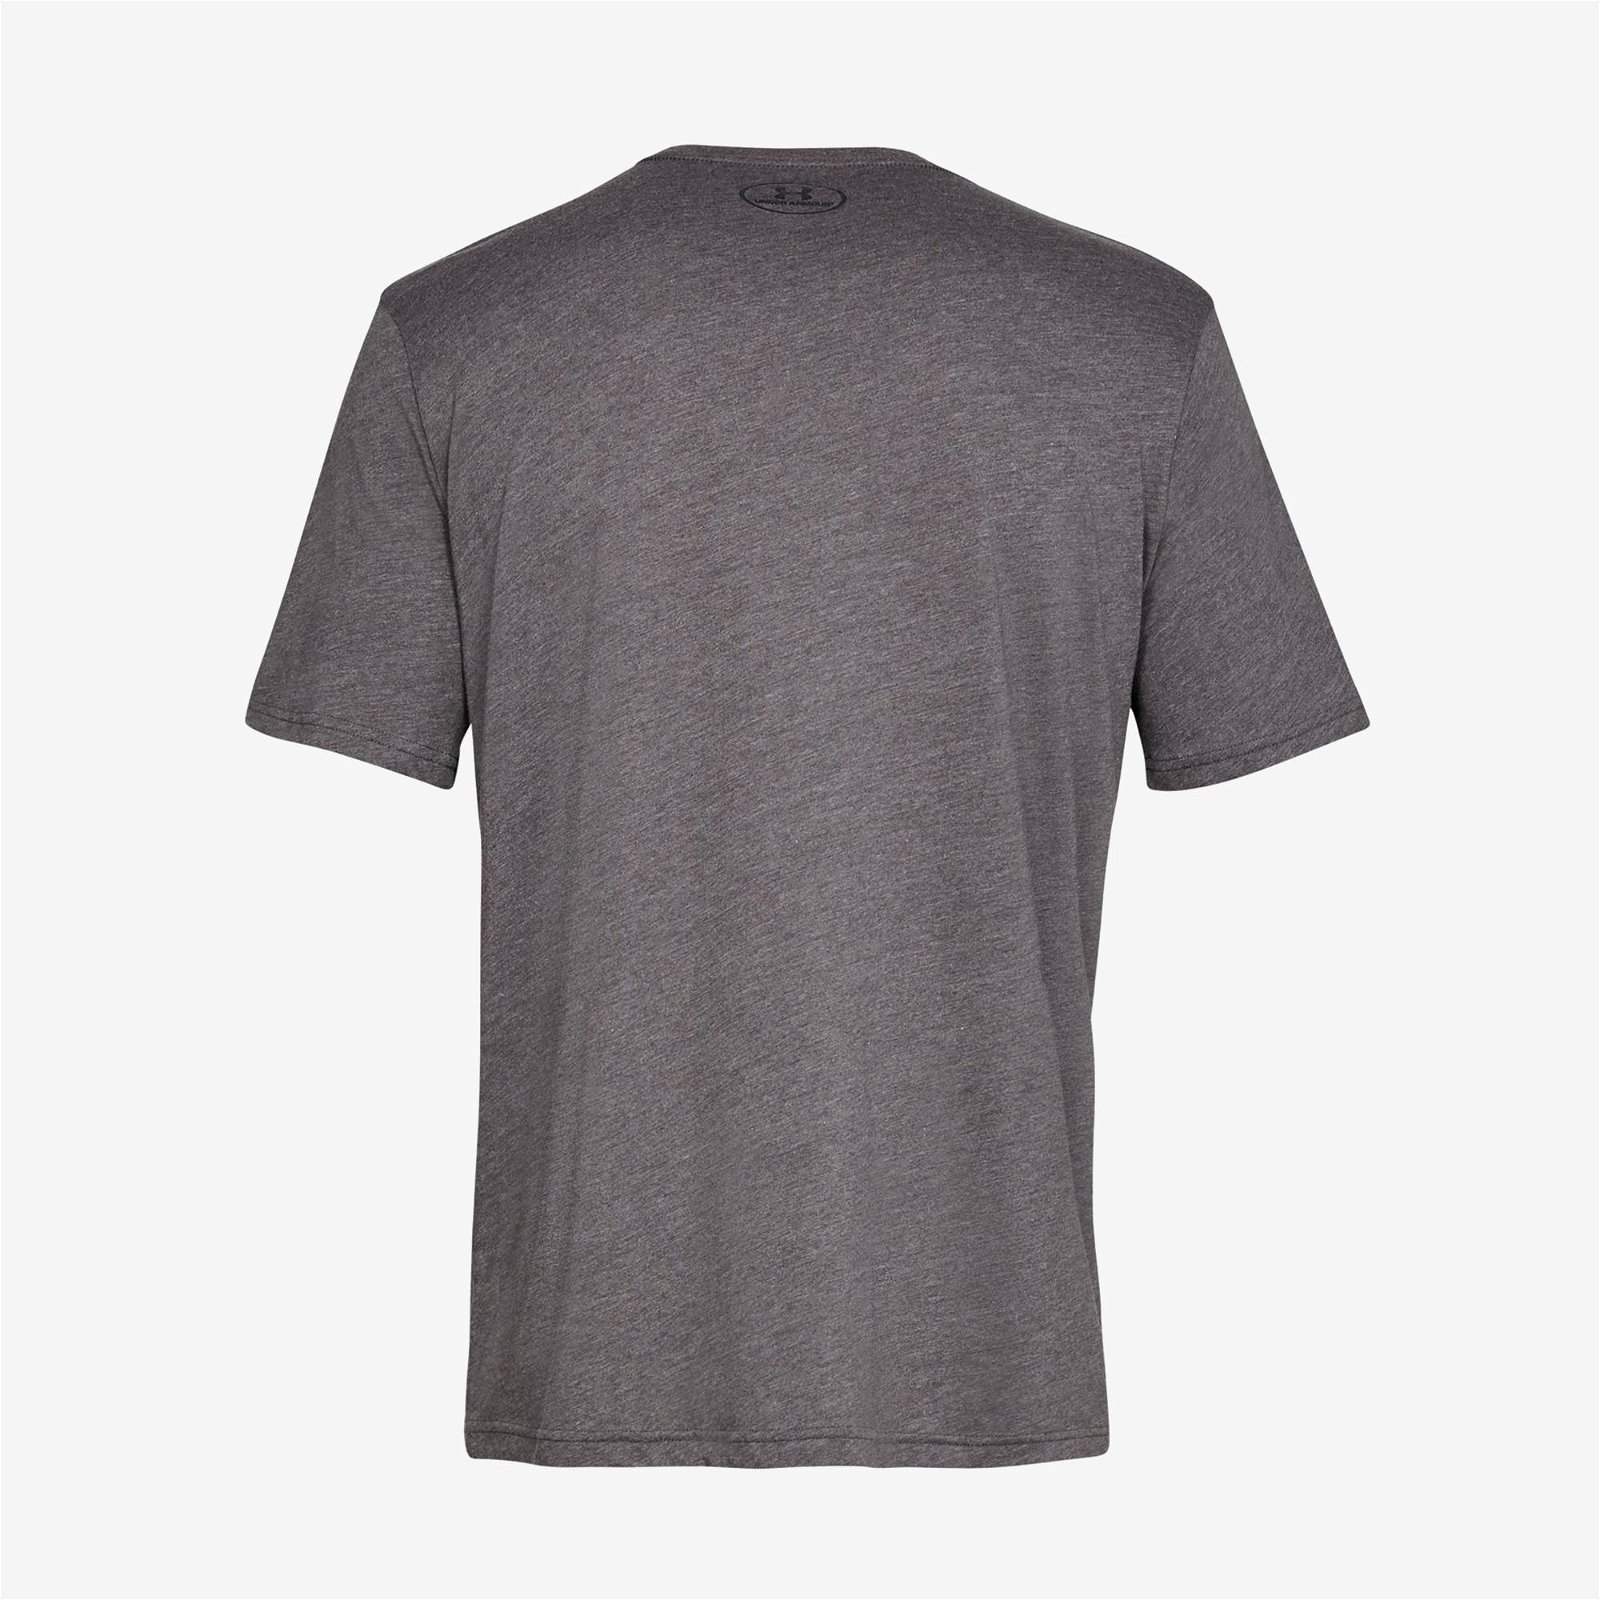 Under Armour Sportstyle Gri T-Shirt